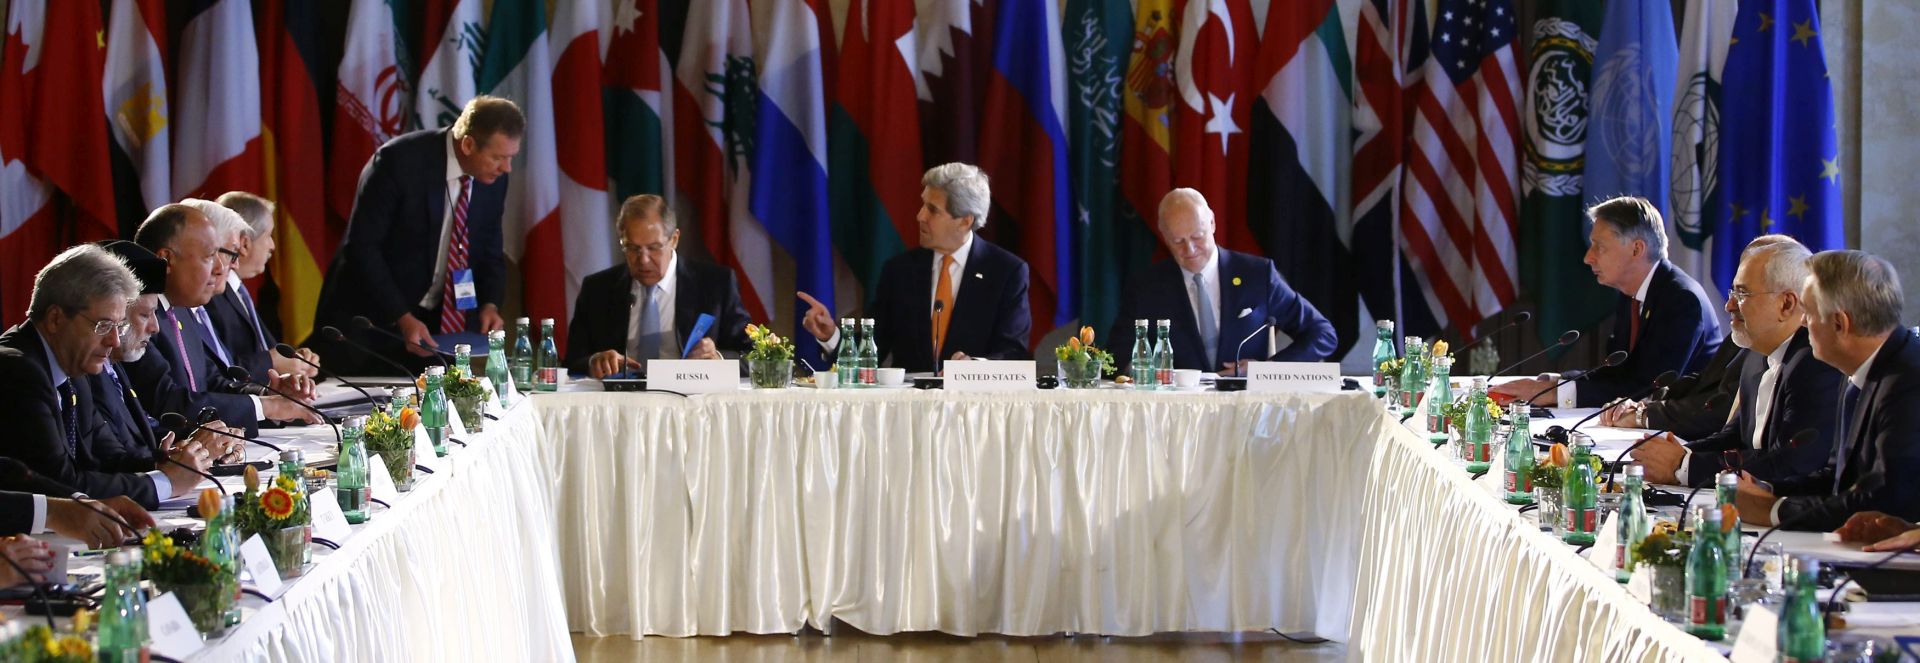 epa05311339 Russian Foreign Minister Sergei Lavrov (L), US Secretary of State John Kerry (C) and United Nations special envoy on Syria Staffan de Mistura (R) attend the ministerial meeting on Syria in Vienna, Austria, 17 May 2016. Chief diplomats from about 20 countries are holding crisis talks on Syria in ths Austrian capital to discuss a ceasefire process and political settlement.  EPA/LEONHARD FOEGER / POOL